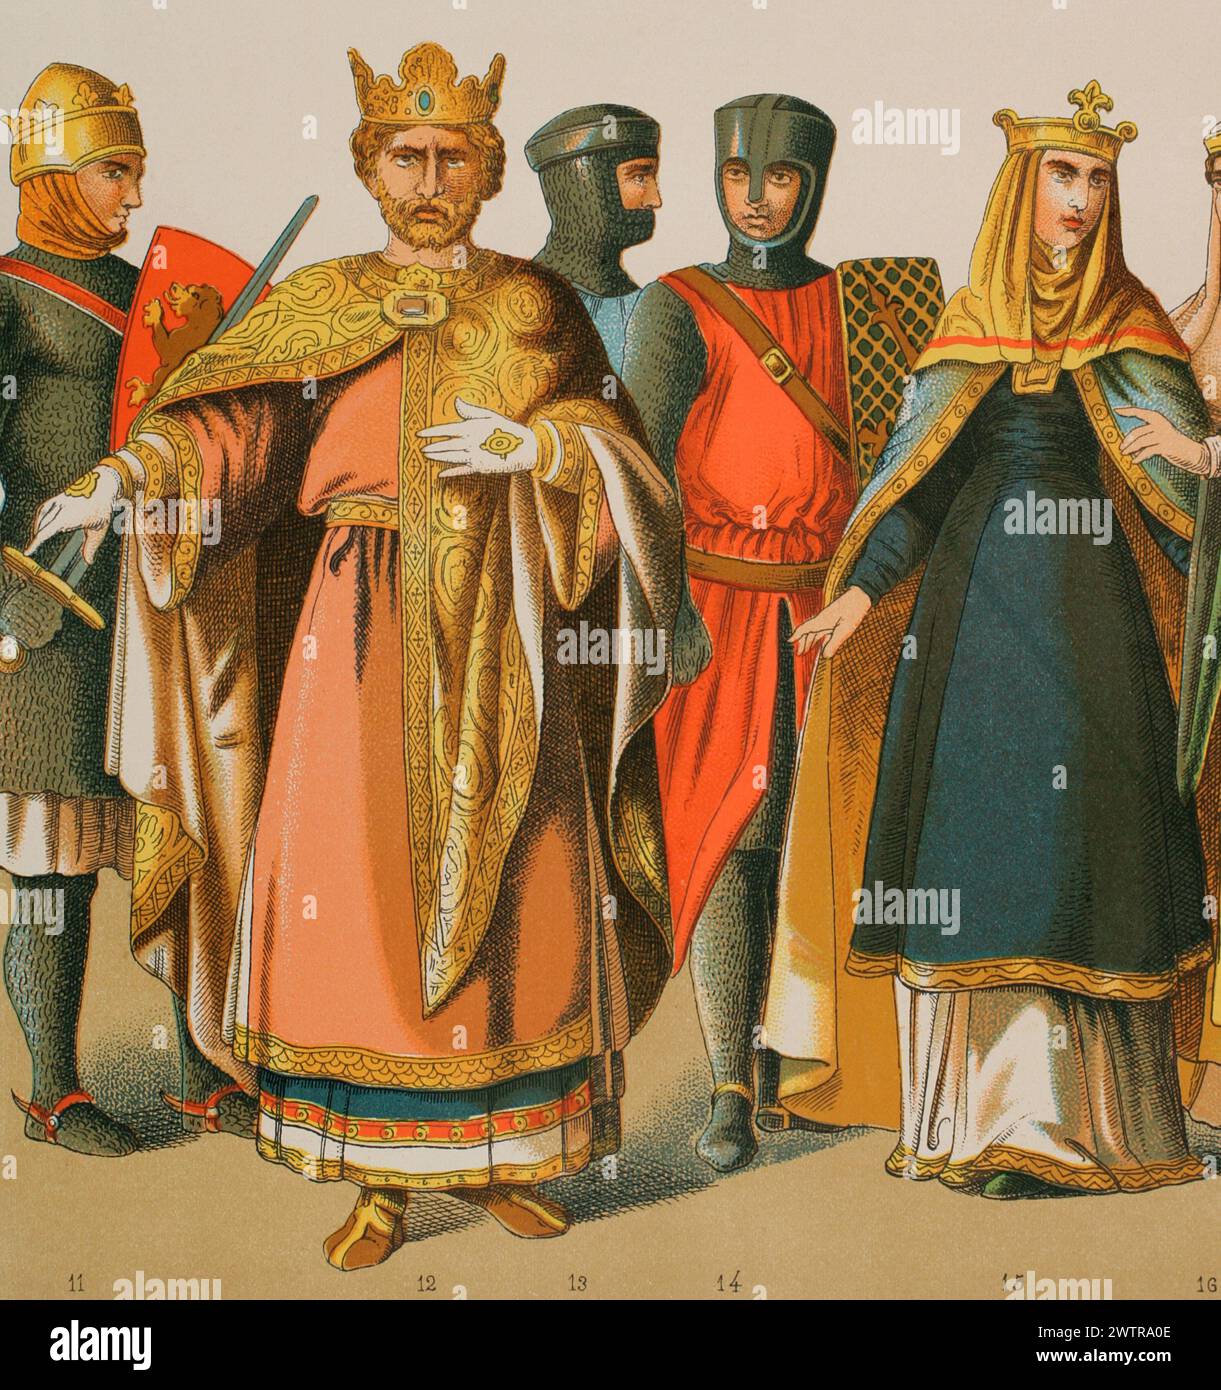 Normans, 1000-1100. From left to right: King Richard I of England (1157-1199), knights and queen. Chromolithography. 'Historia Universal', by César Cantú. Volume V, 1884. Stock Photo